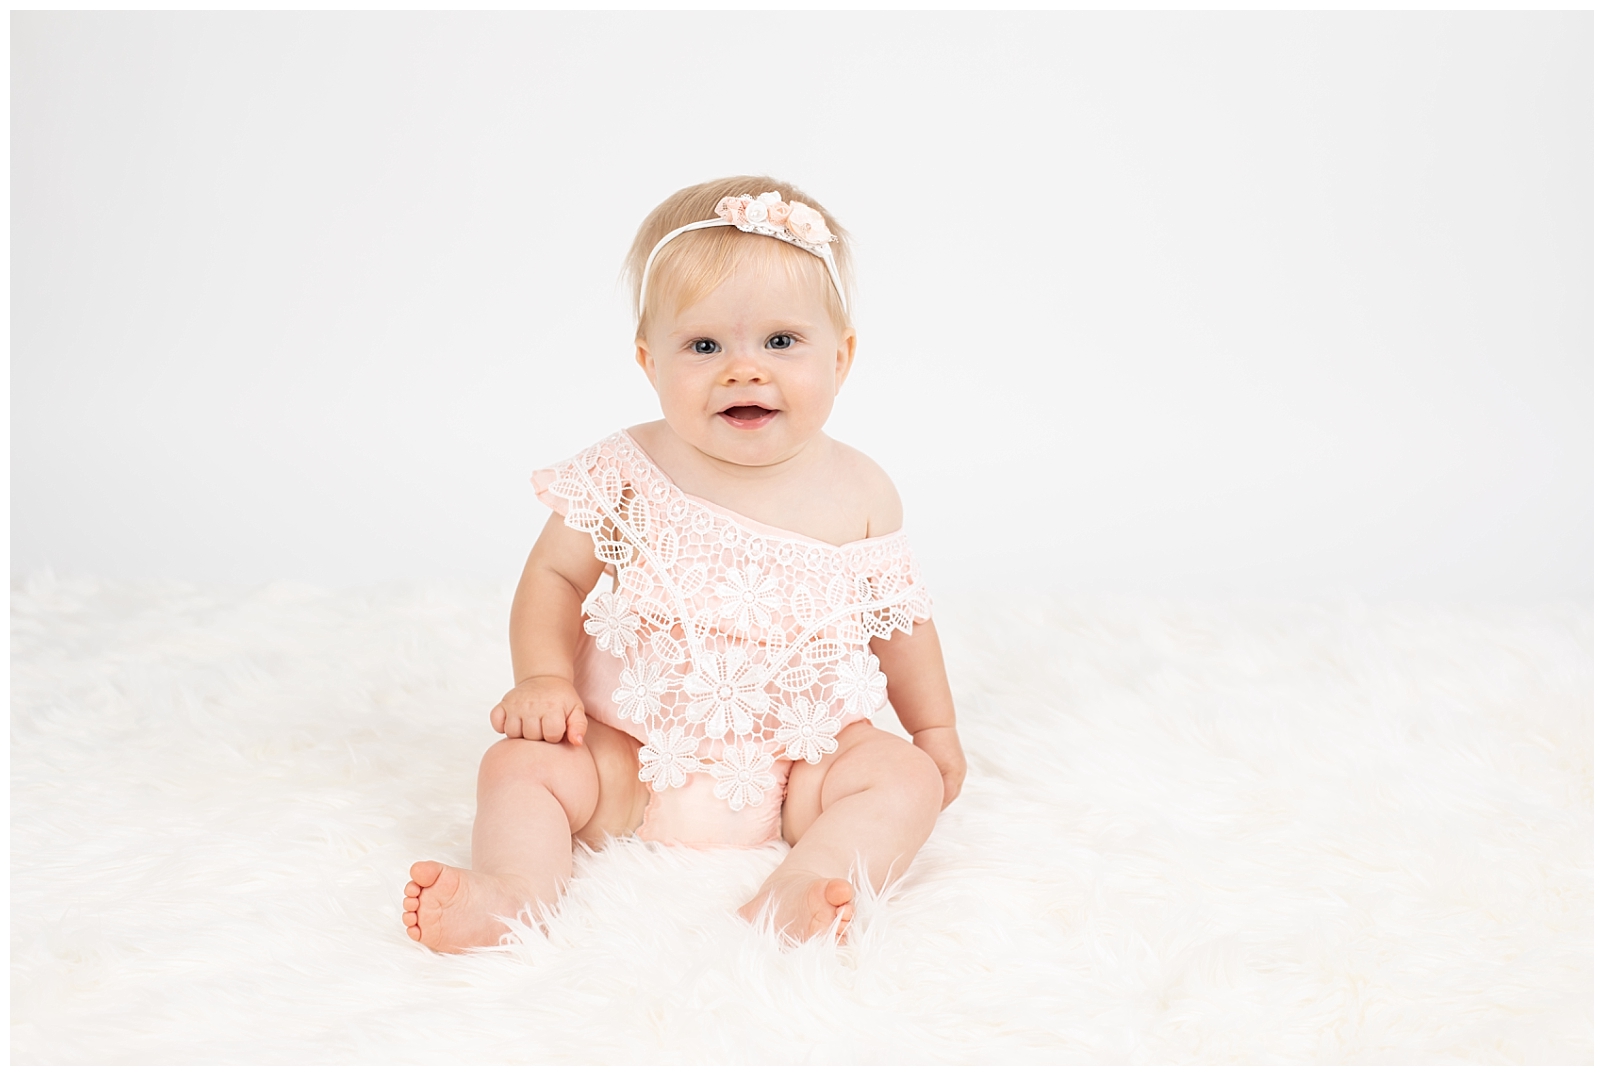 Peach romper with white flower lace on a baby girl